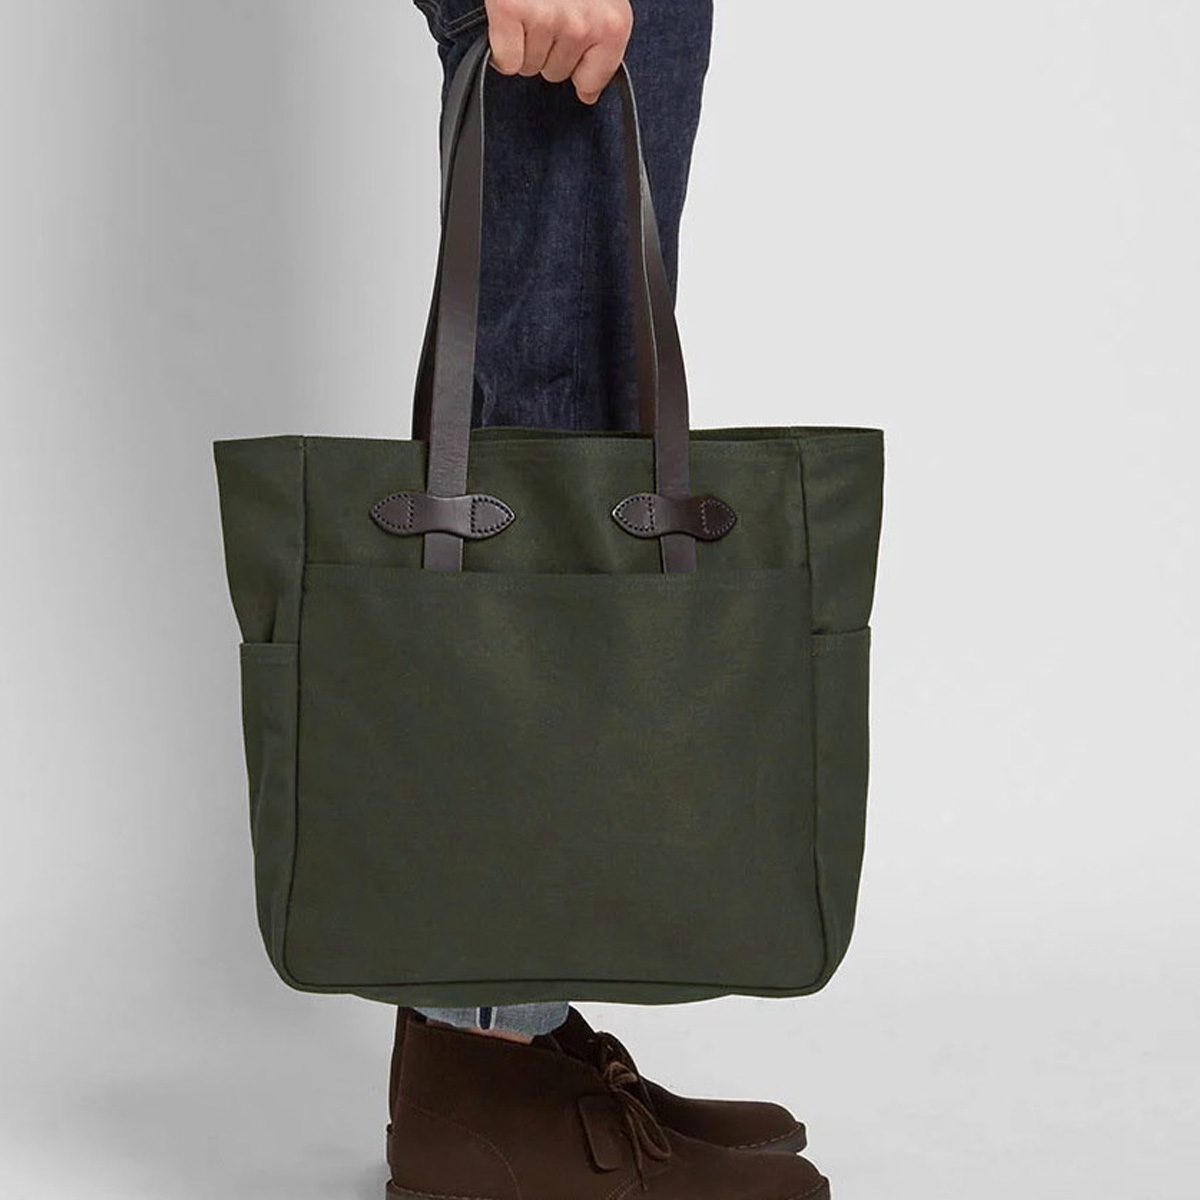 Filson Rugged Twill Tote Bag 11070260-Otter Green, this Tote can be worn right next to your body or comfortably on your shoulder